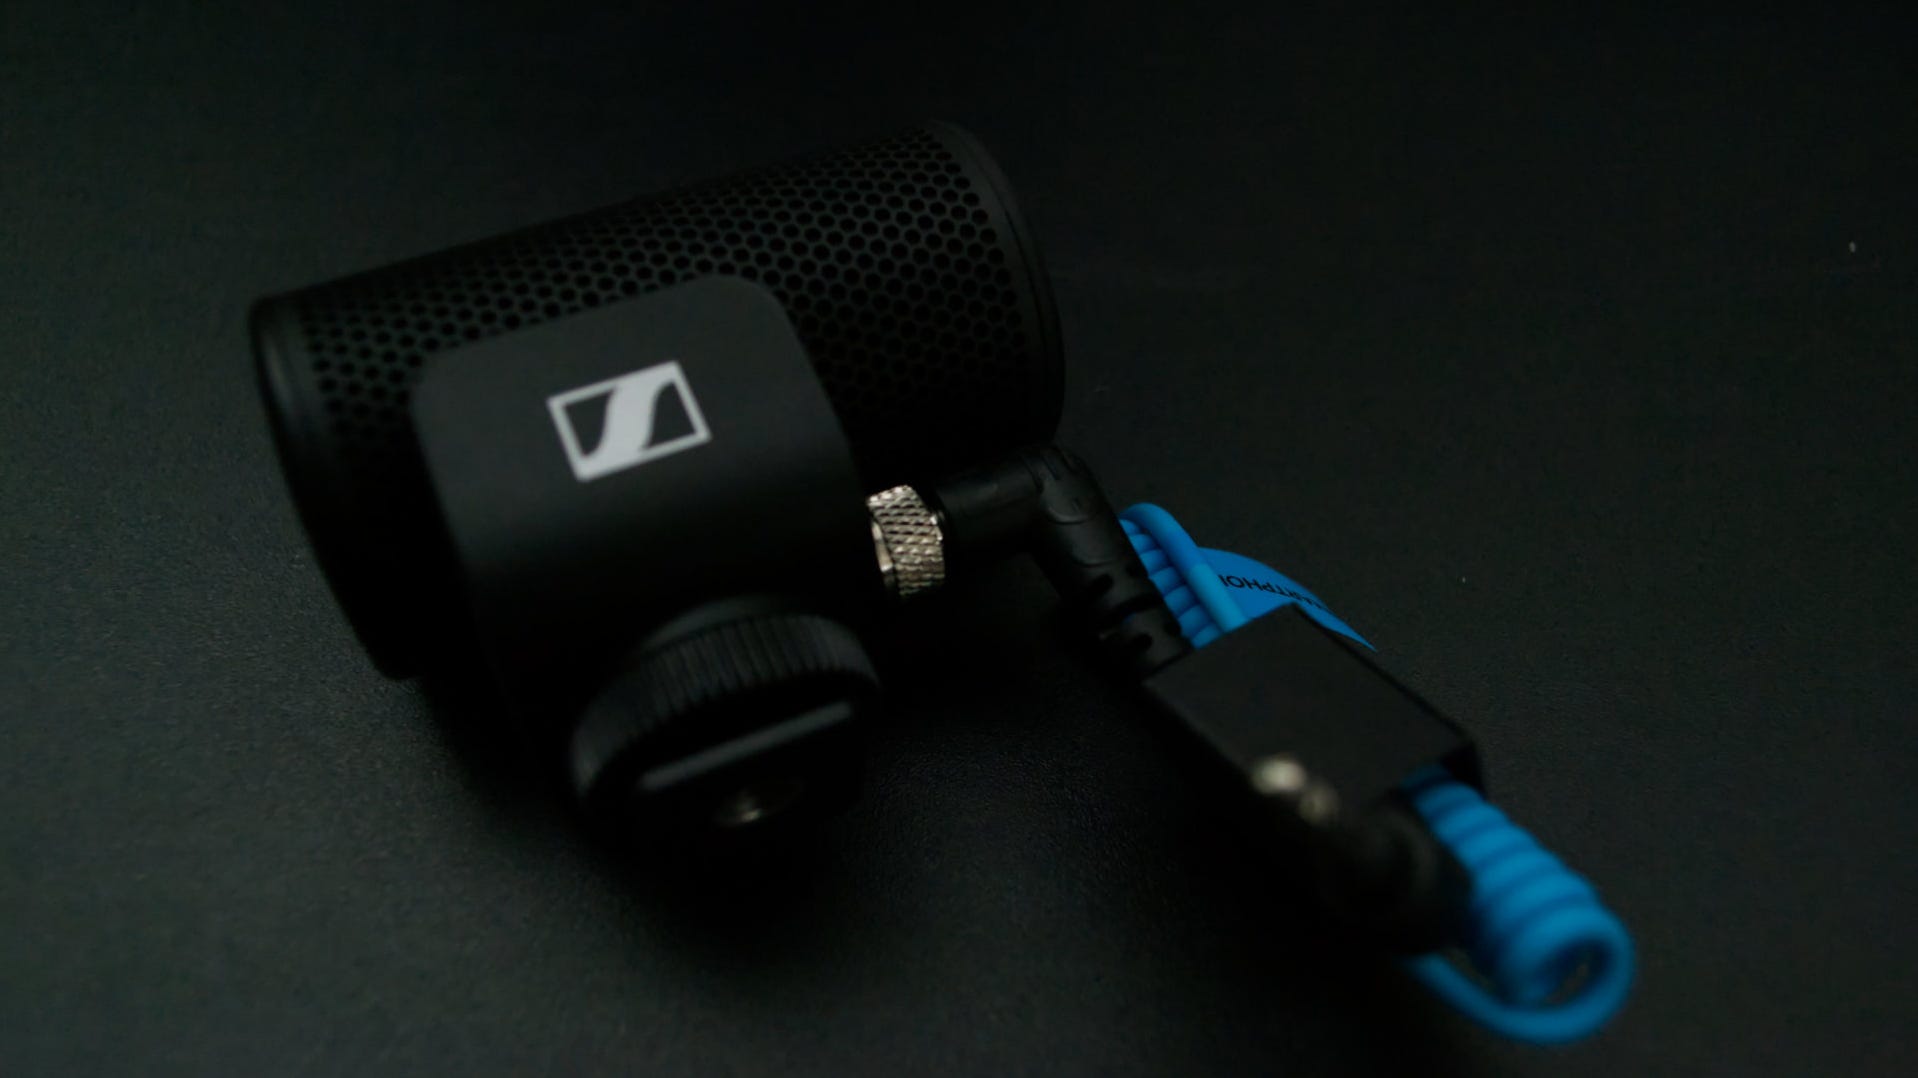 Sennheiser MKE 200 Mobile Kit cable plugged in and locked